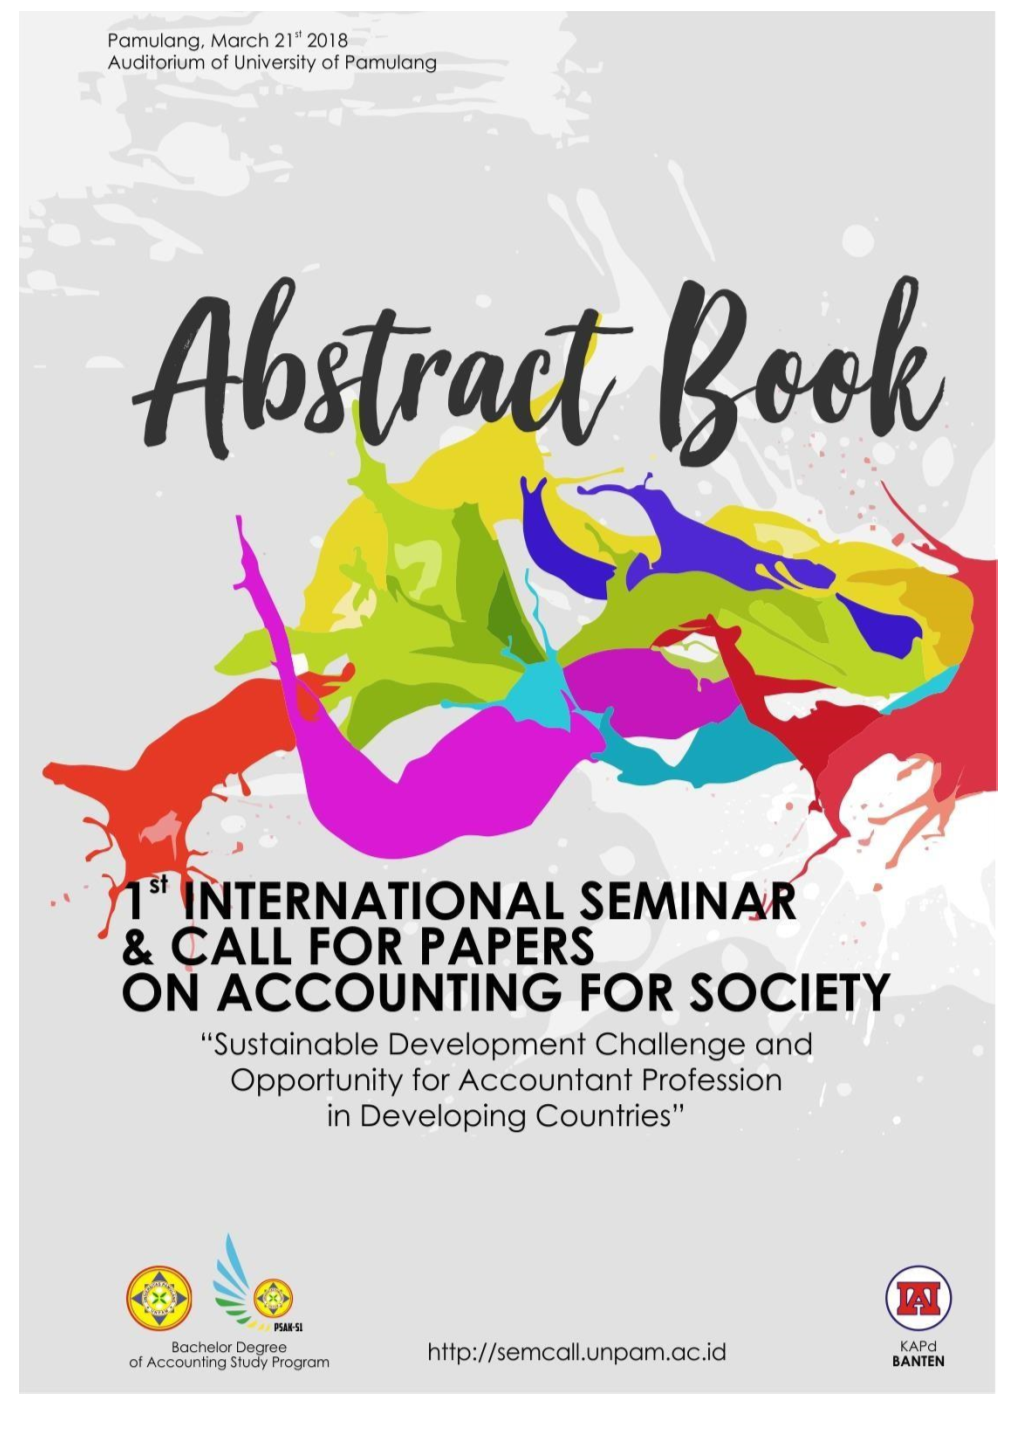 Abstract Book the 1St International Seminar & Call for Papers Bachelor